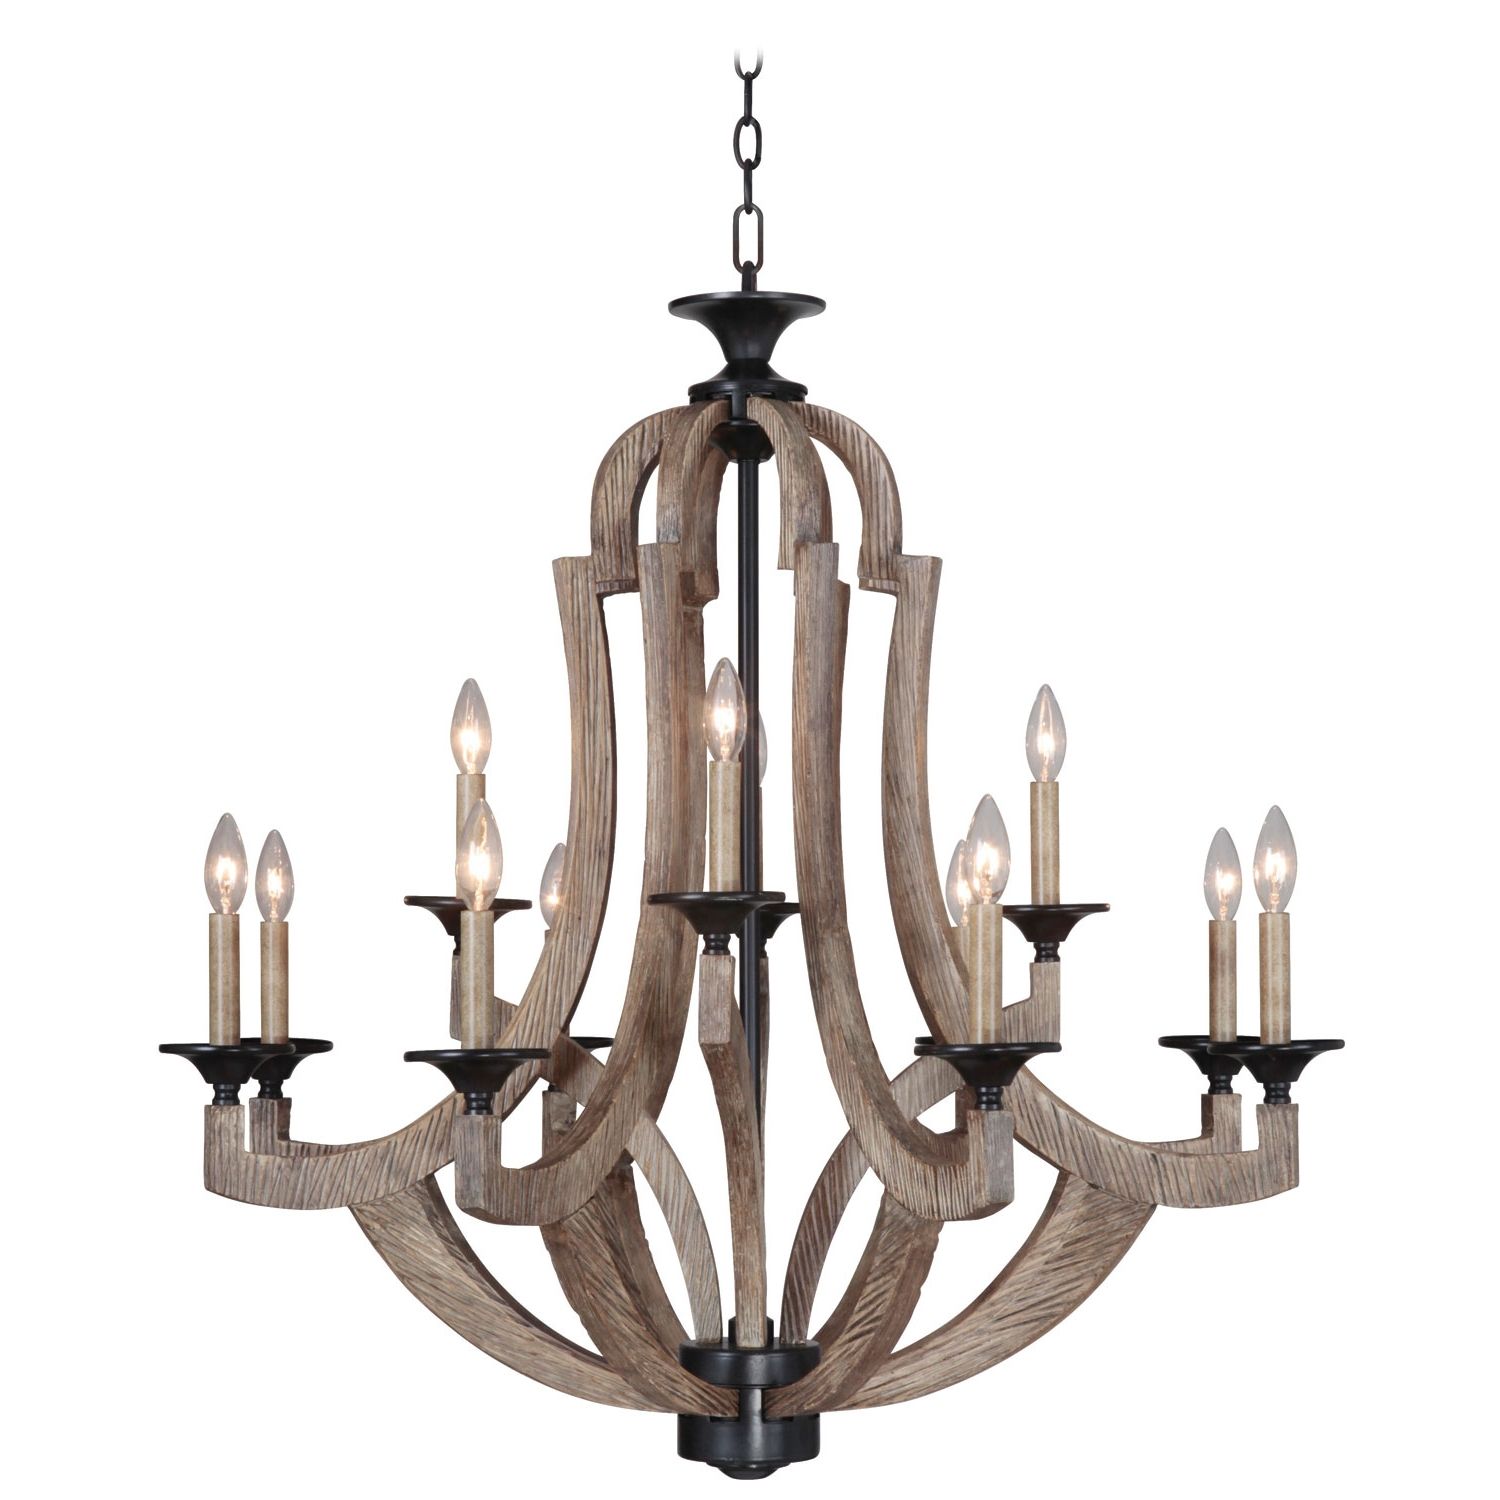 Bellacor For Favorite French Country Chandeliers (View 11 of 15)